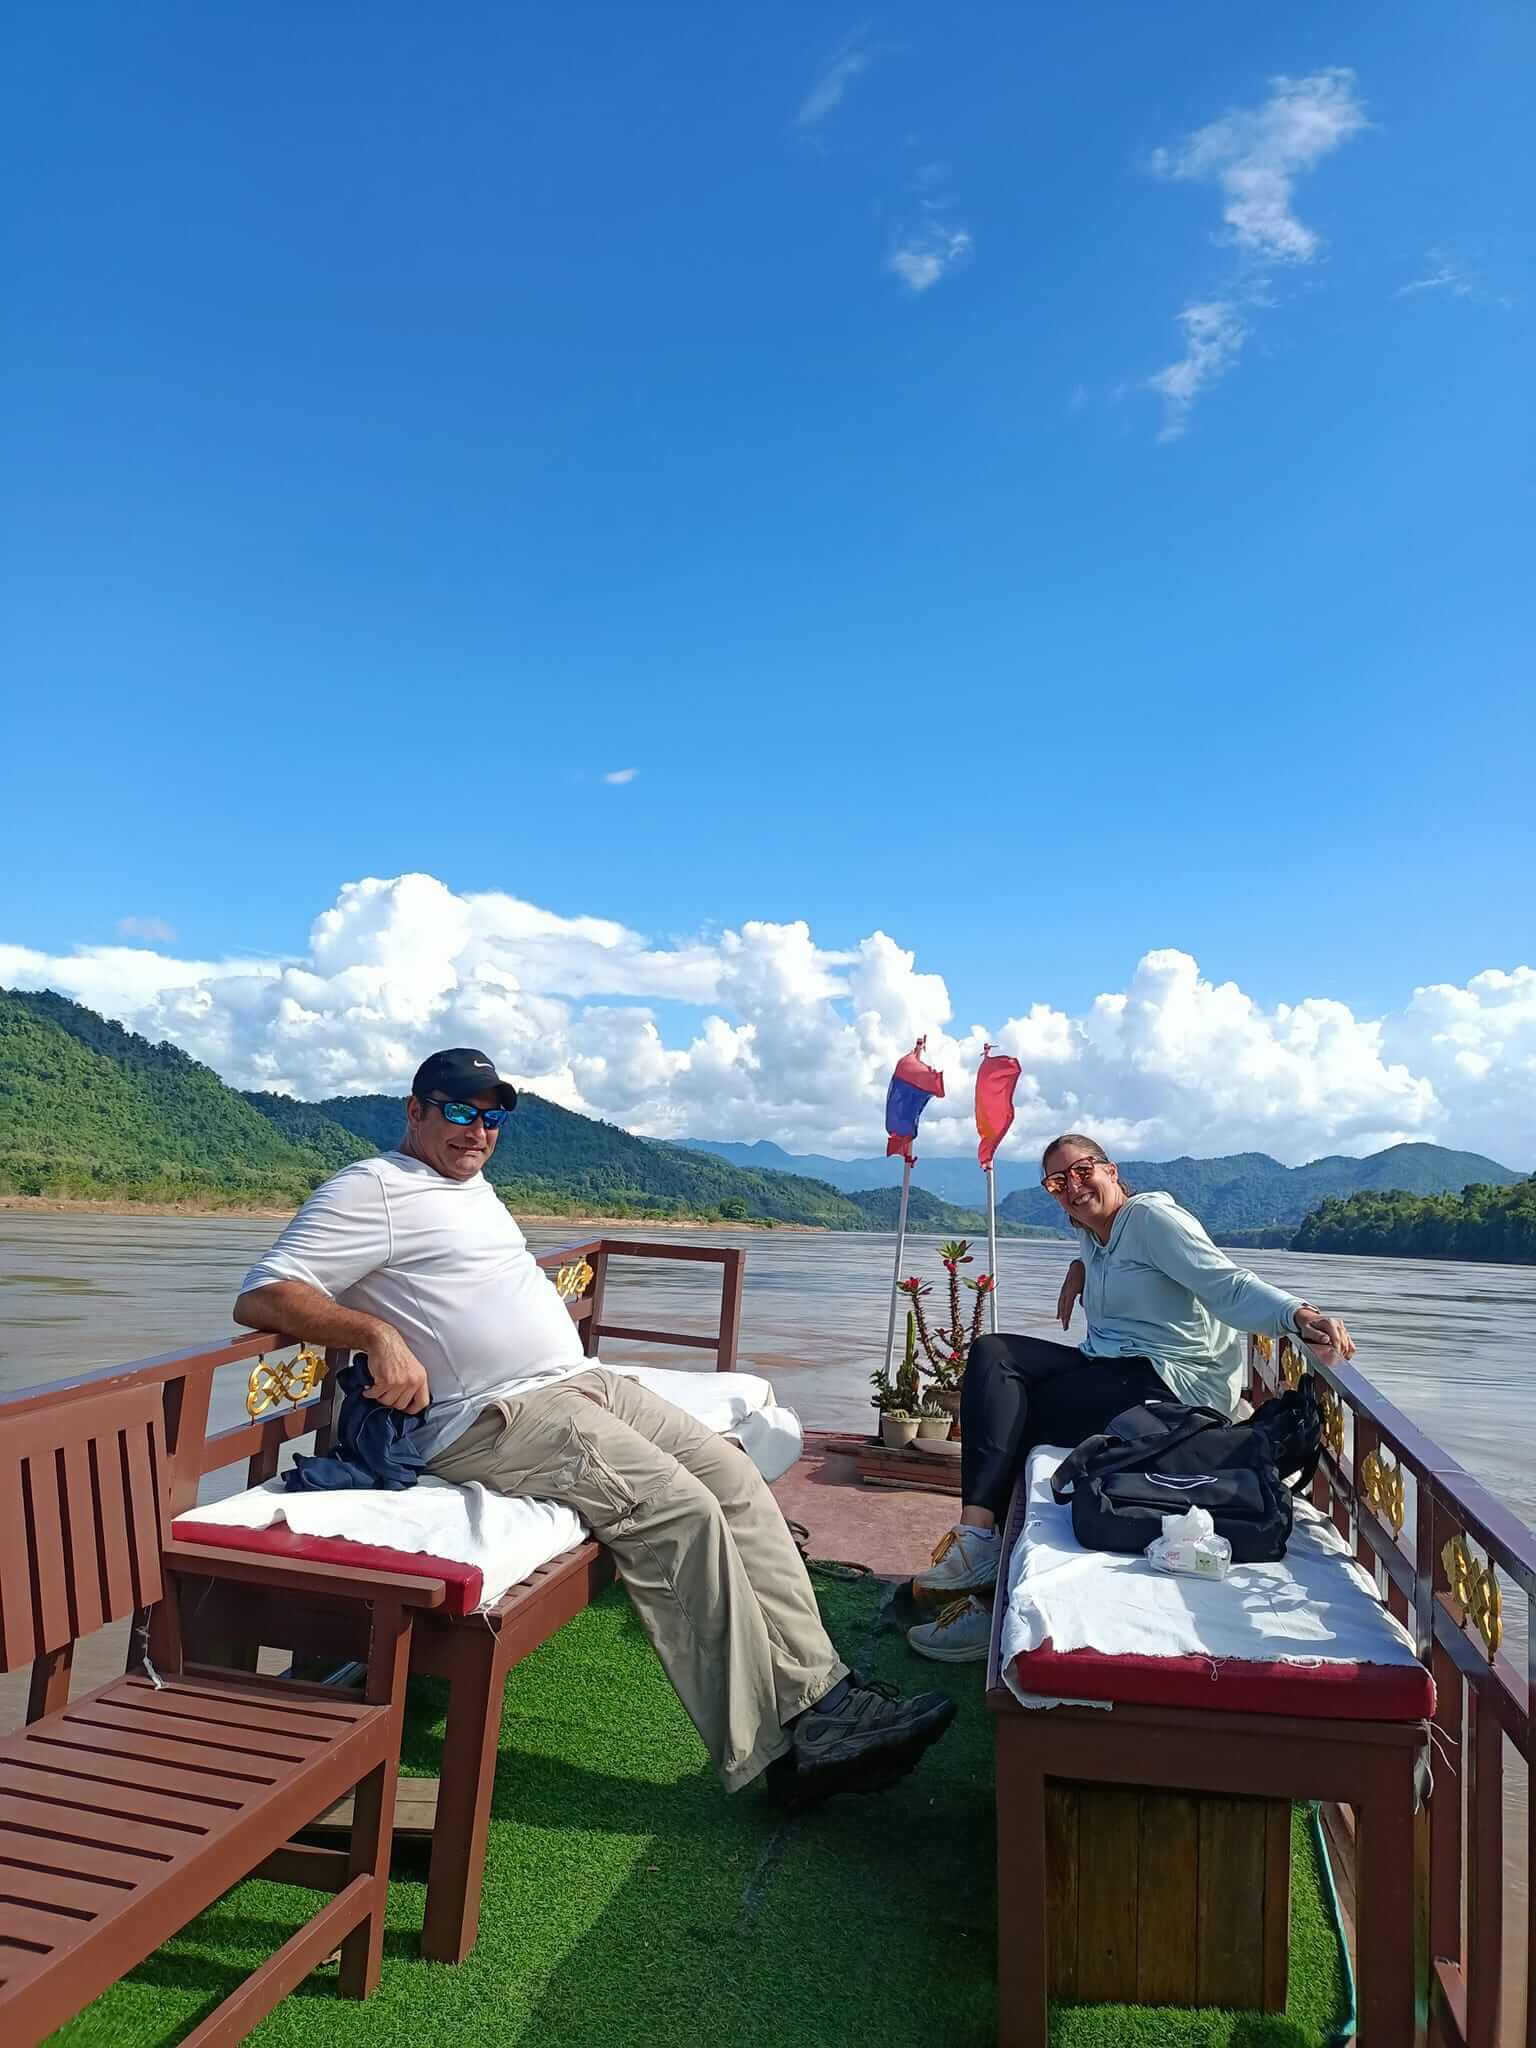 Authentic-Laos-Itinerary-10-Days-boat-to-pak-ou-cave-luang-prabang.jpg